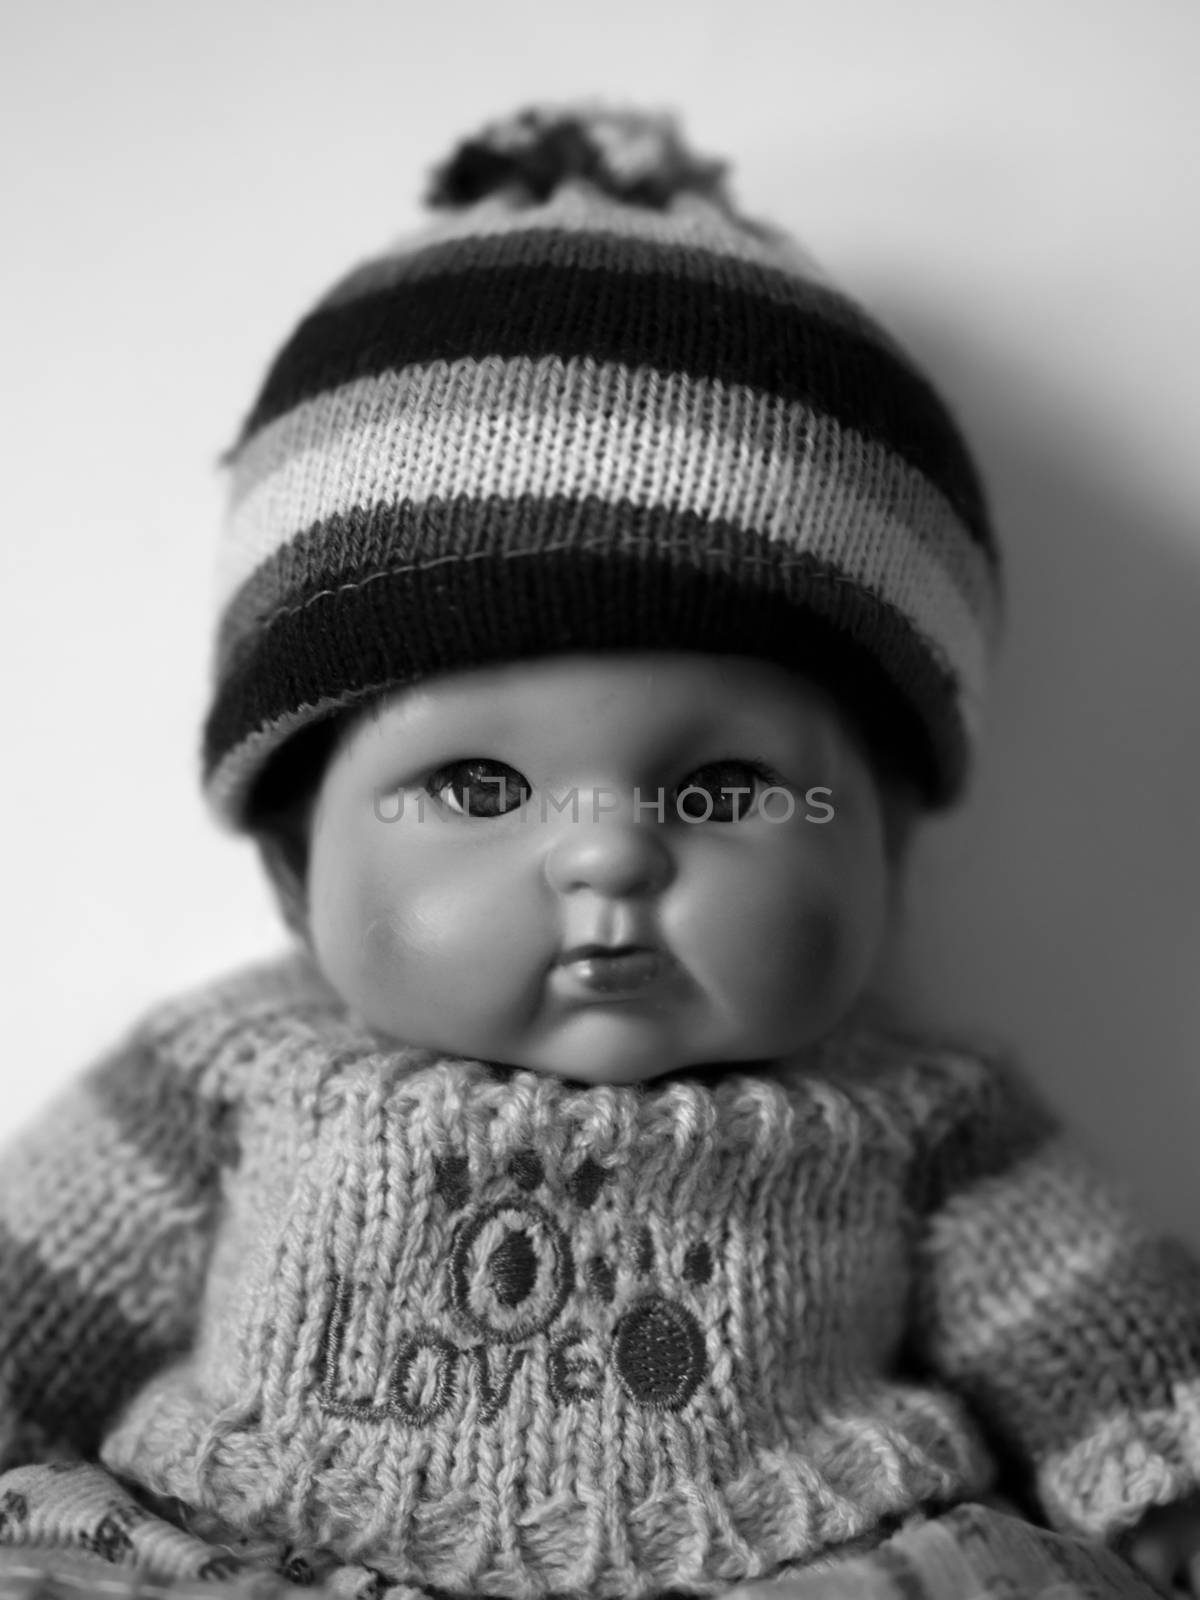 BLACK AND WHITE PHOTO OF PORTRAIT OF A DOLL